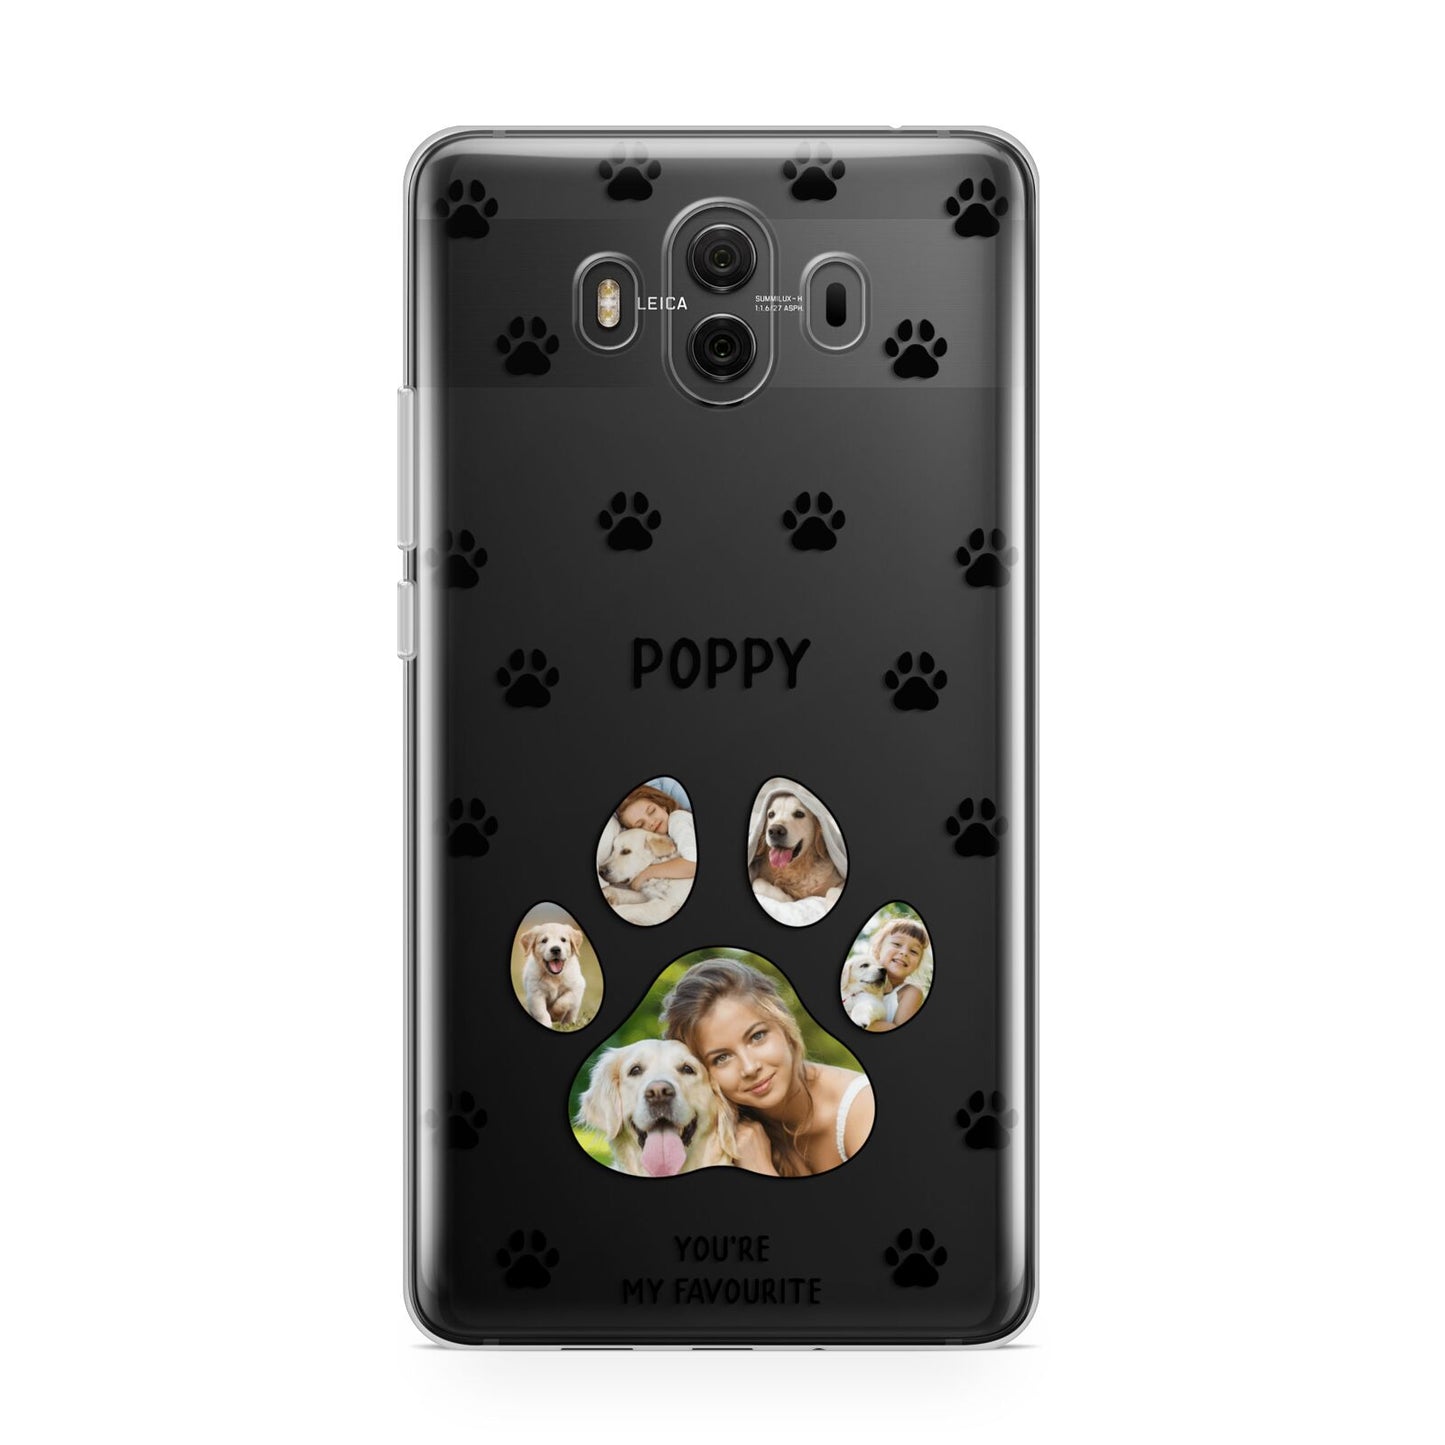 Favourite Dog Photos Personalised Huawei Mate 10 Protective Phone Case